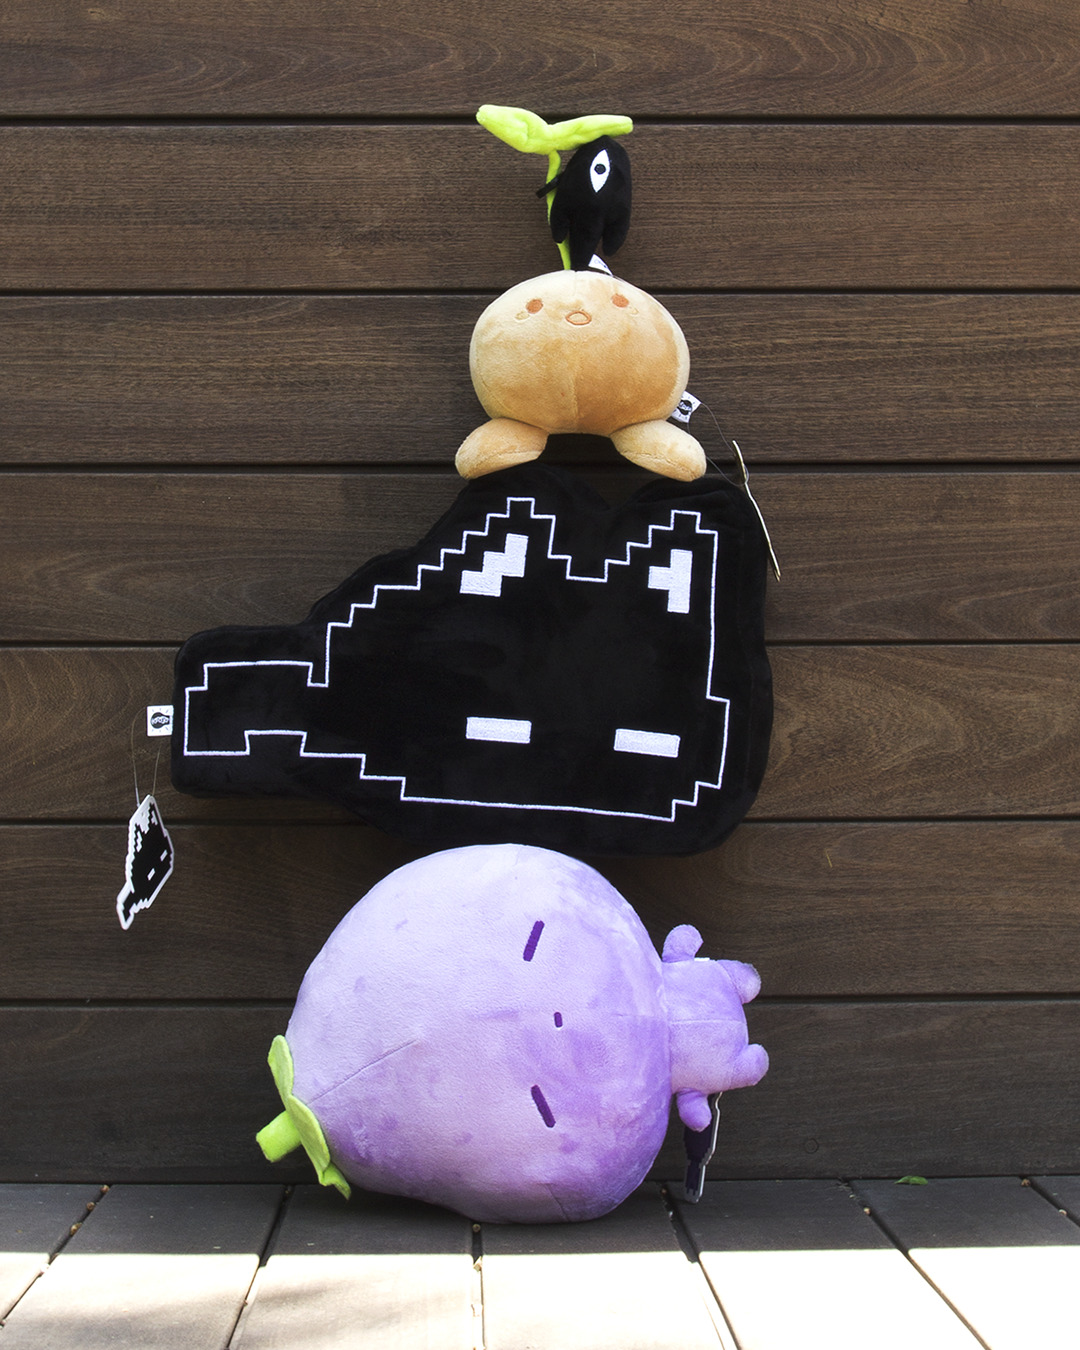 OMOCAT · OMORI plushies are now open for pre-order!